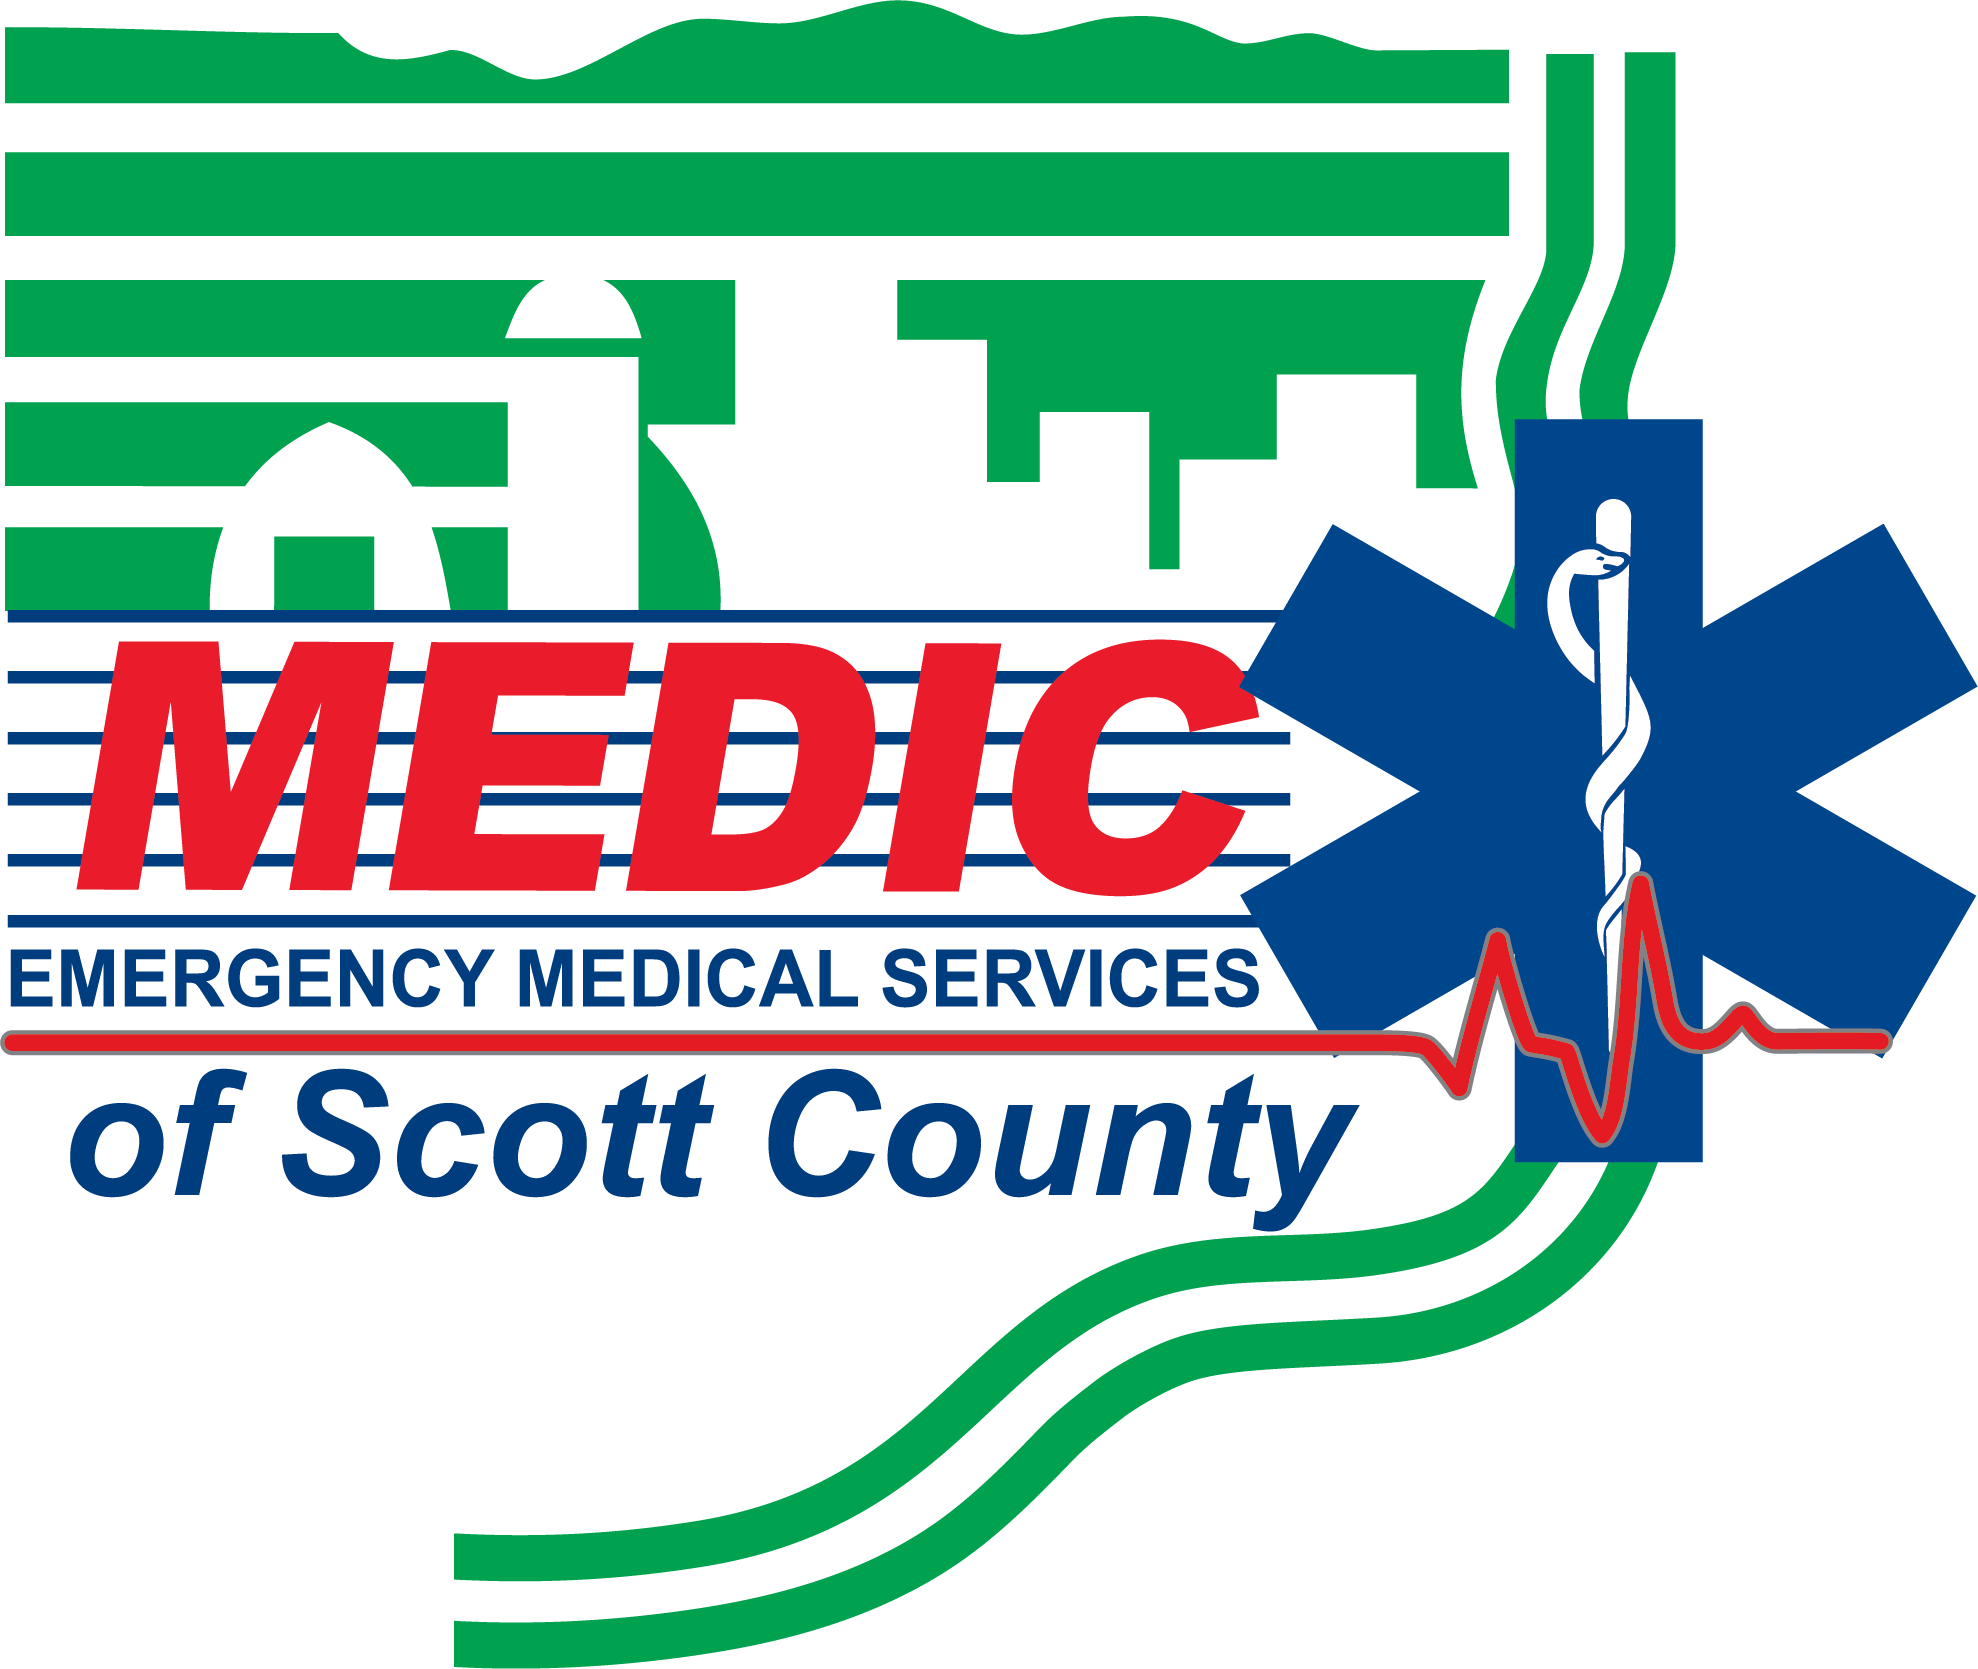 MEDIC Emergency Medical Services of Scott County